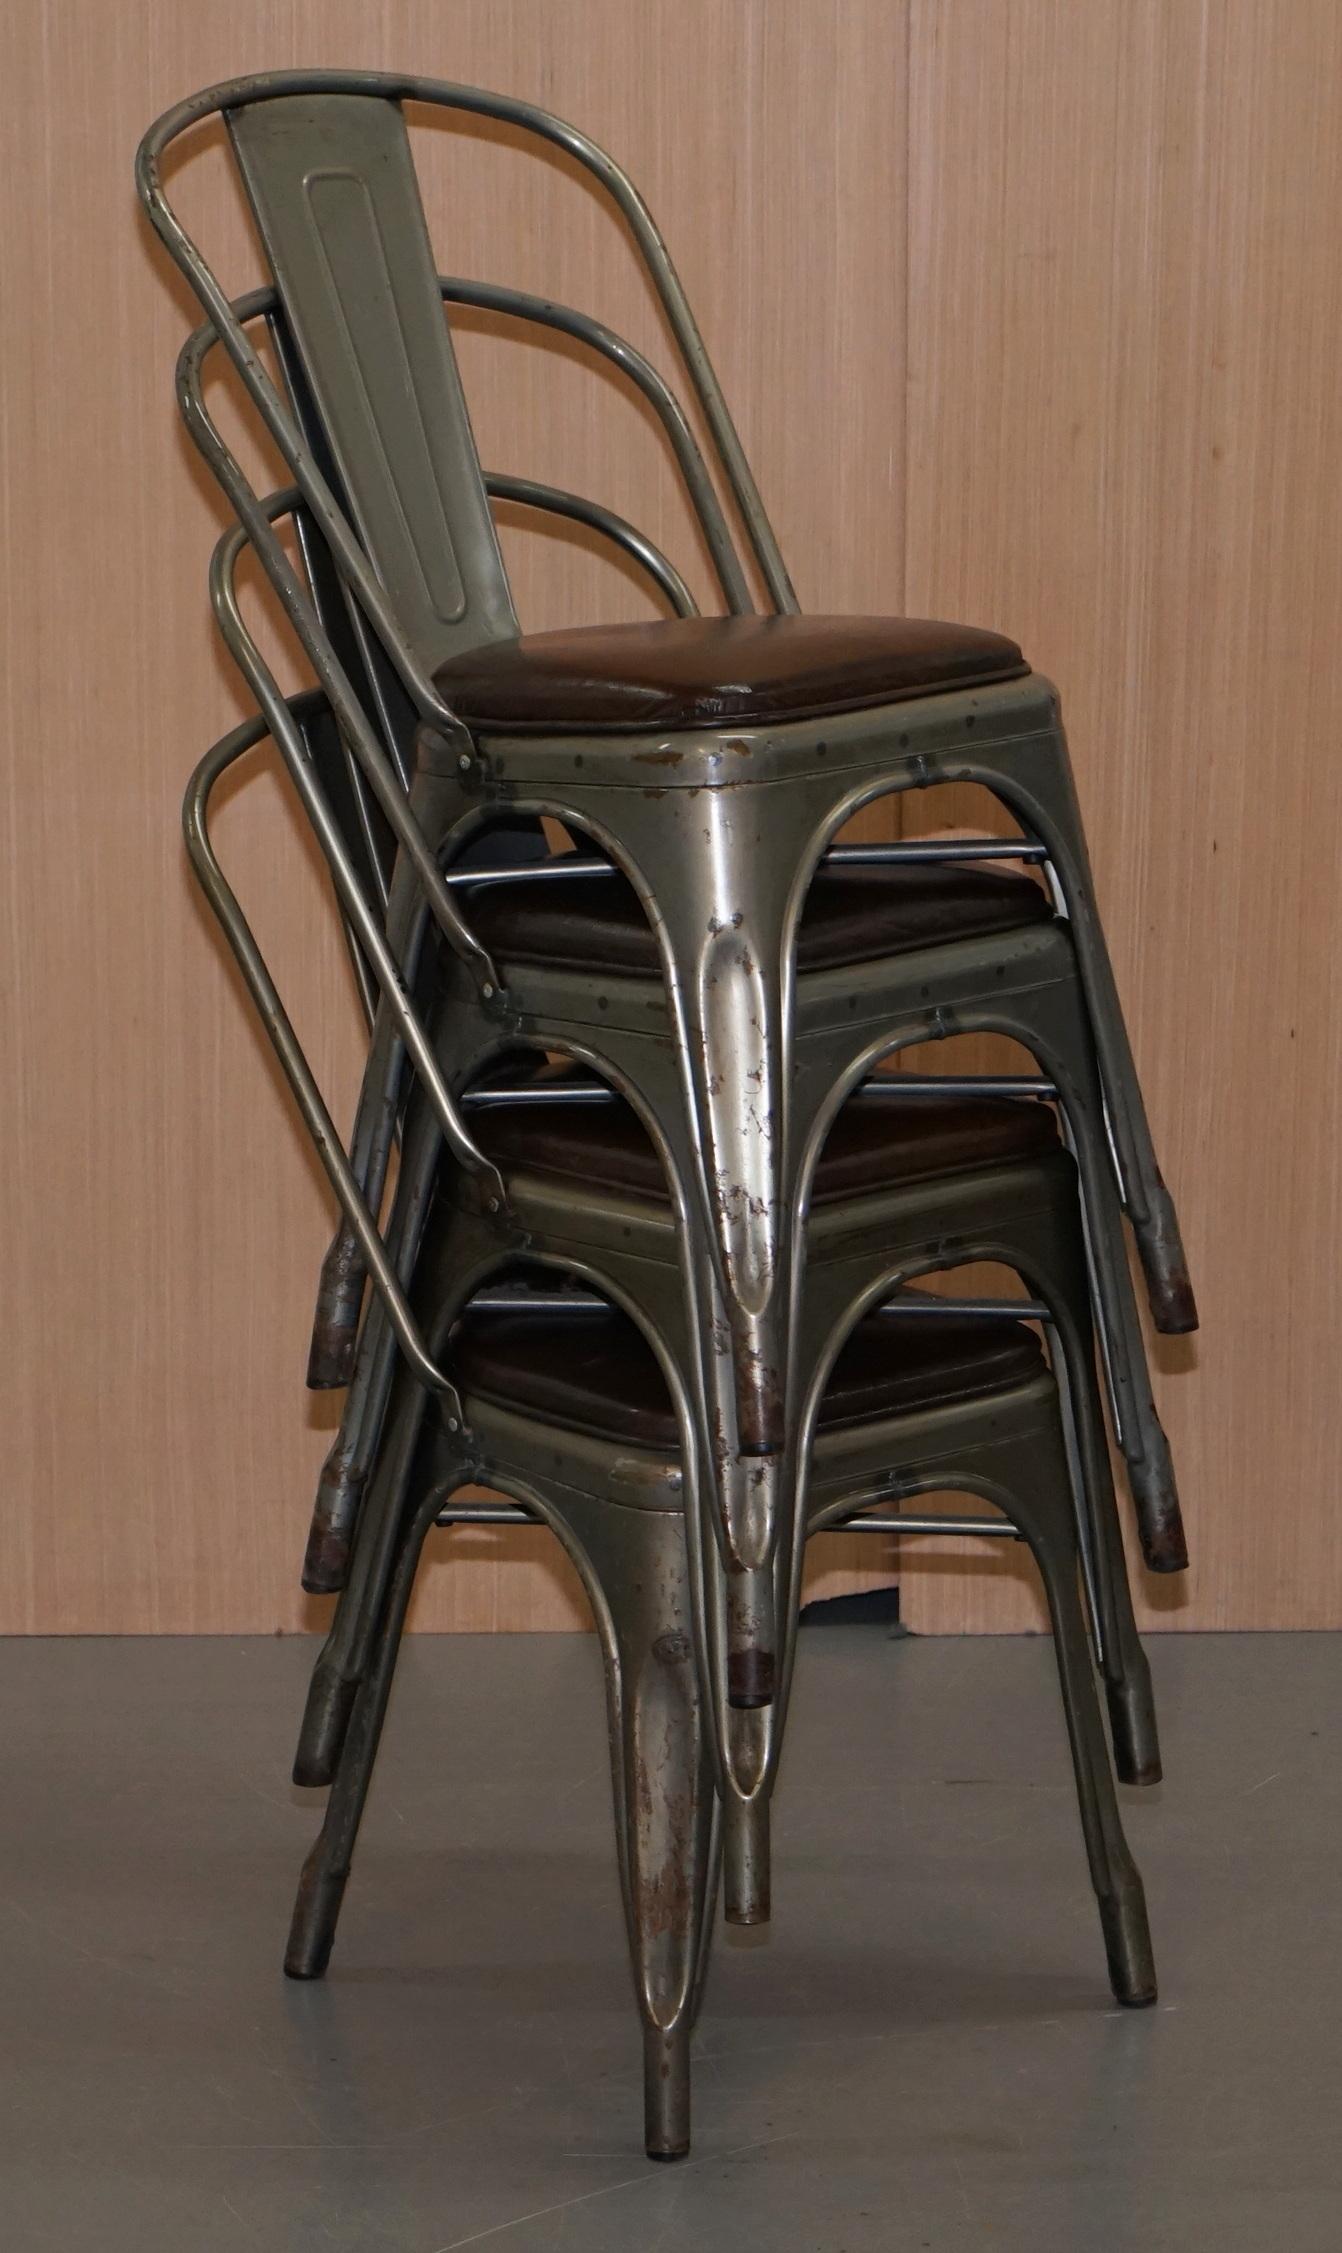 Set of Four Gun Metal Grey Stacking Chairs Tolix V2 with Upholstered Seat Pad 14